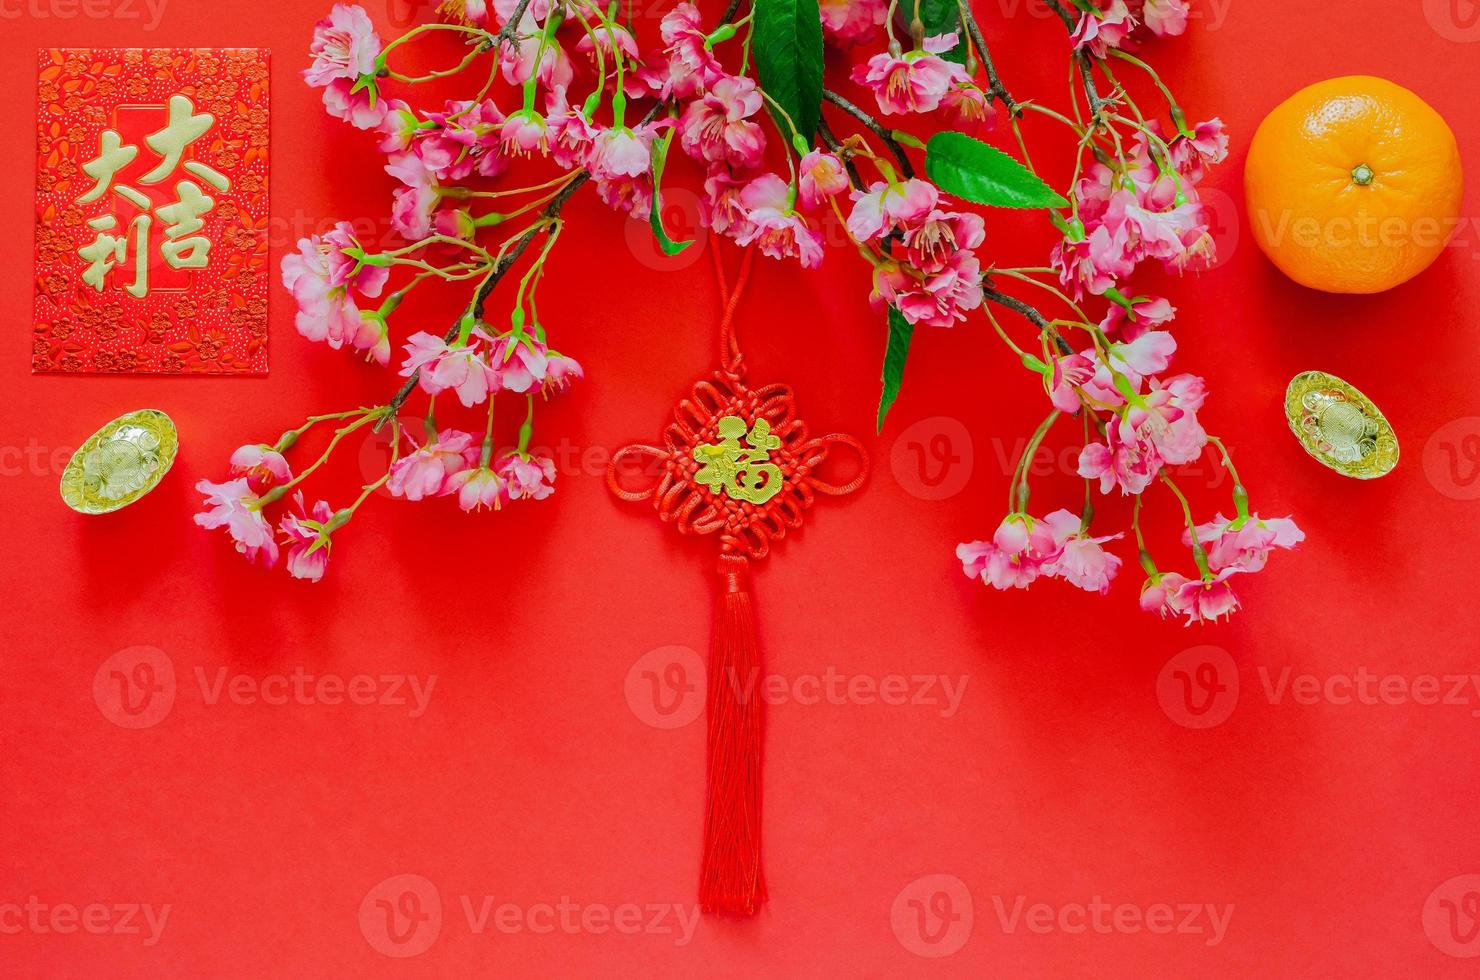 Hanging pendant for Chinese new year ornament word means wealth with Red envelope packet or ang bao word means auspice, gold ingots, orange and Chinese blossom flowers on red background. photo